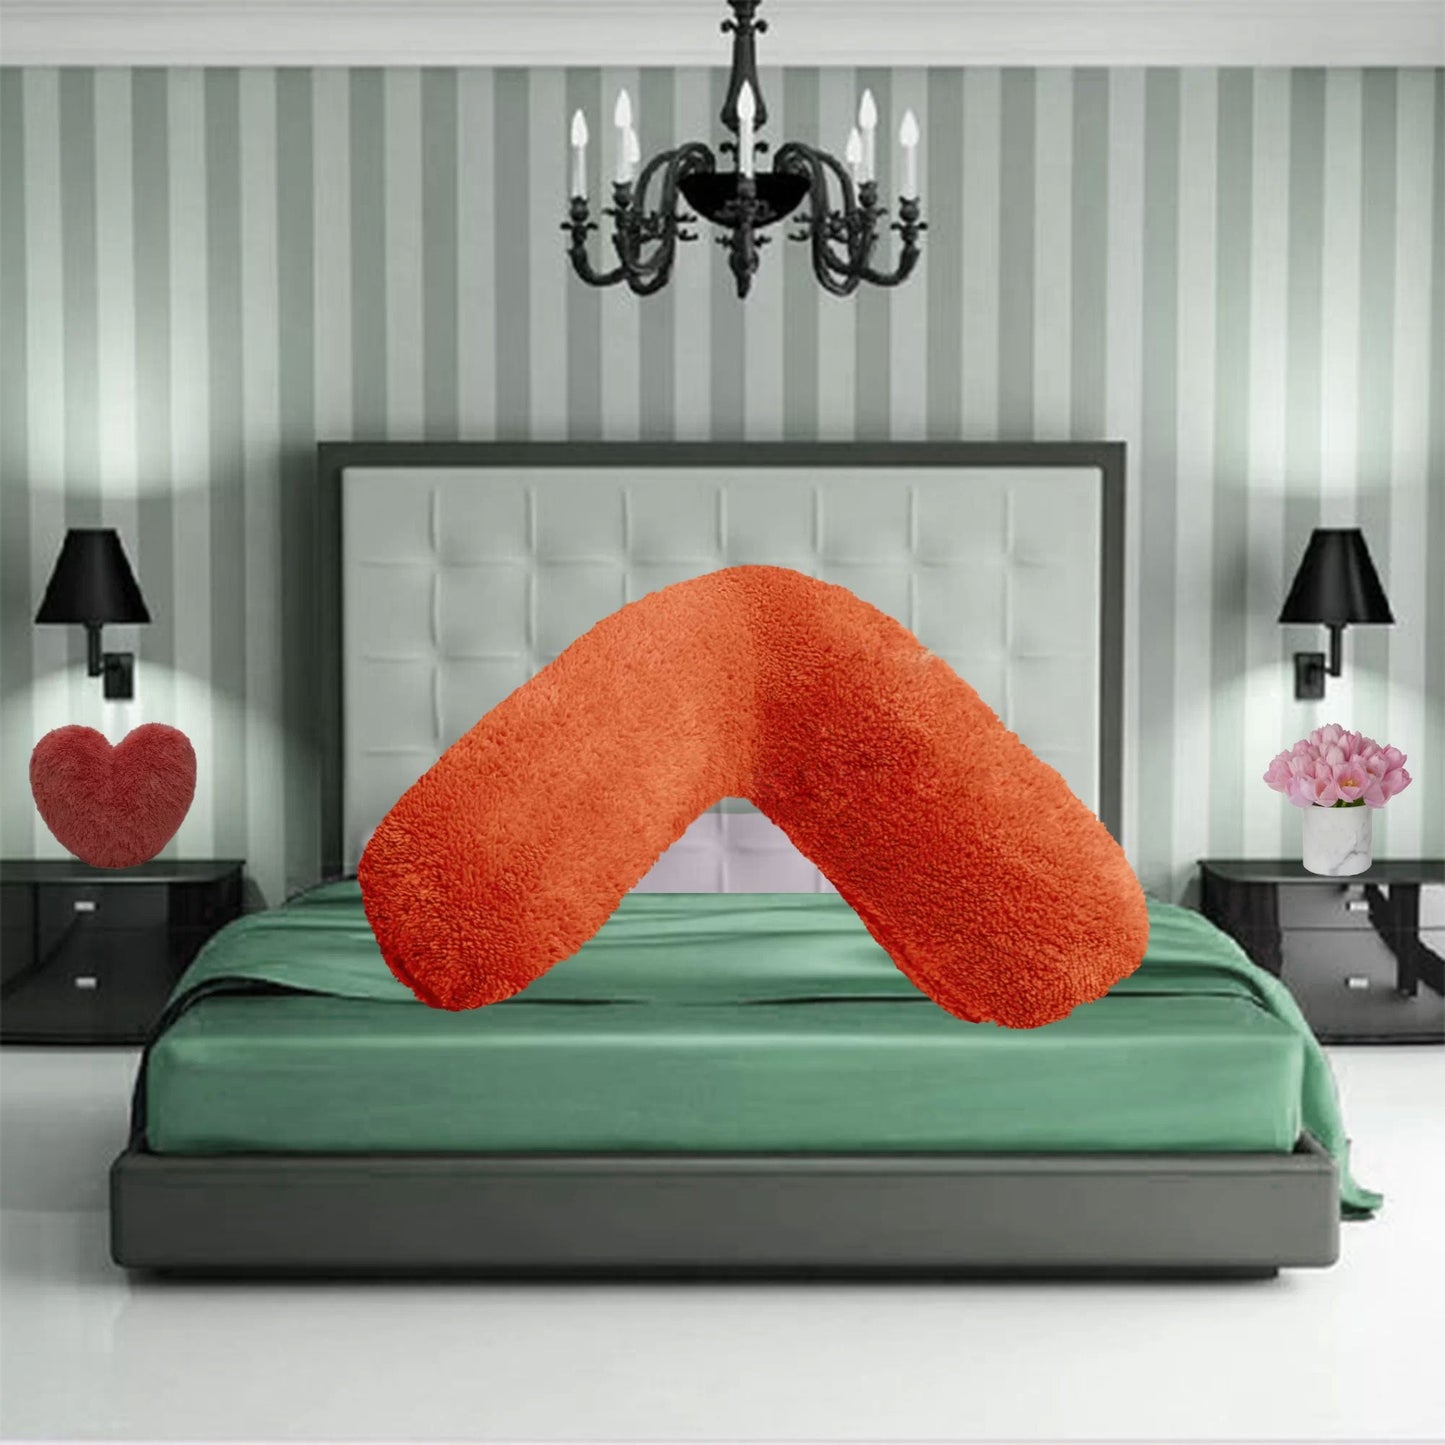 V Shaped Teddy Pillowcase Pregnancy Maternity Cover Only - TheComfortshop.co.ukPillow Case10721718956478thecomfortshopTheComfortshop.co.ukTeddy V Cover Tangerine OnlyTangerineV Shaped Teddy Pillowcase Pregnancy Maternity Cover Only - TheComfortshop.co.uk